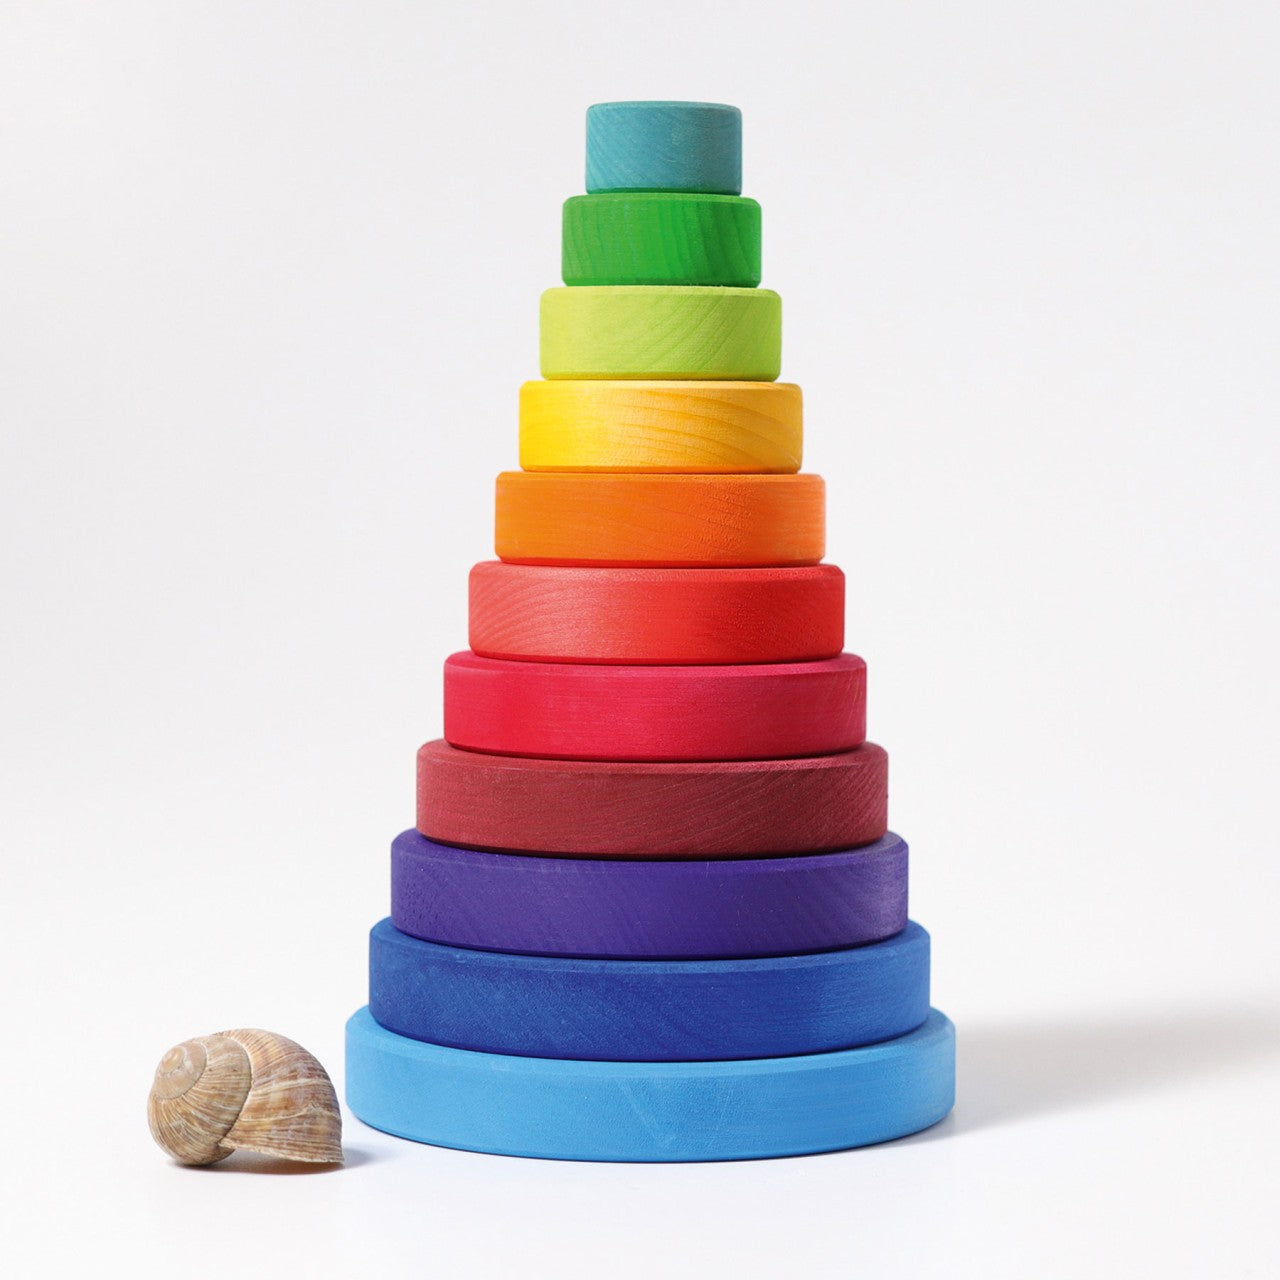 Conical Tower Stacker | Wooden Toys for Kids | Toddler Activity Toy